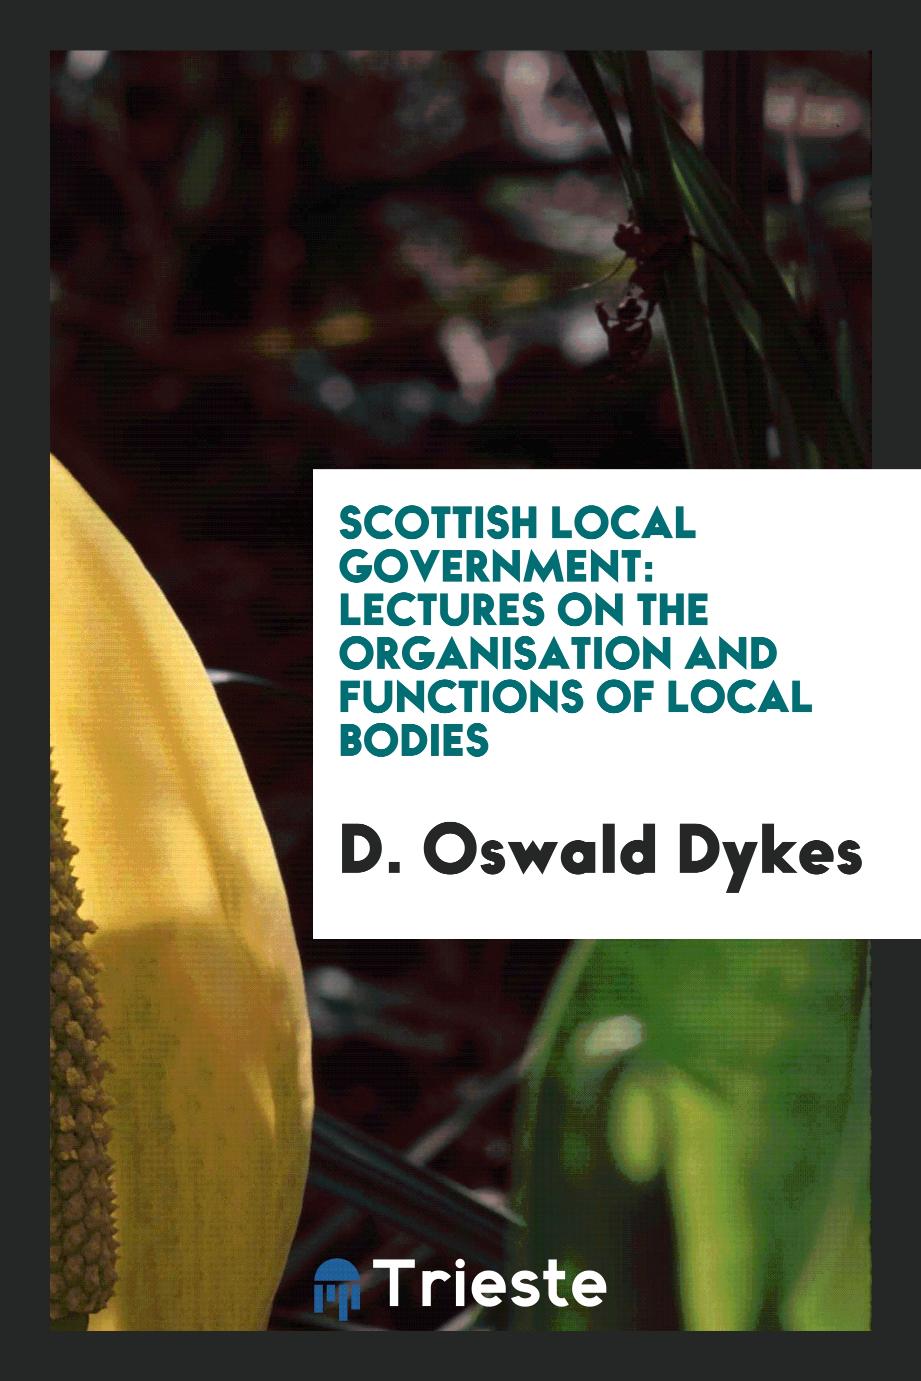 Scottish Local Government: Lectures on the Organisation and Functions of Local Bodies